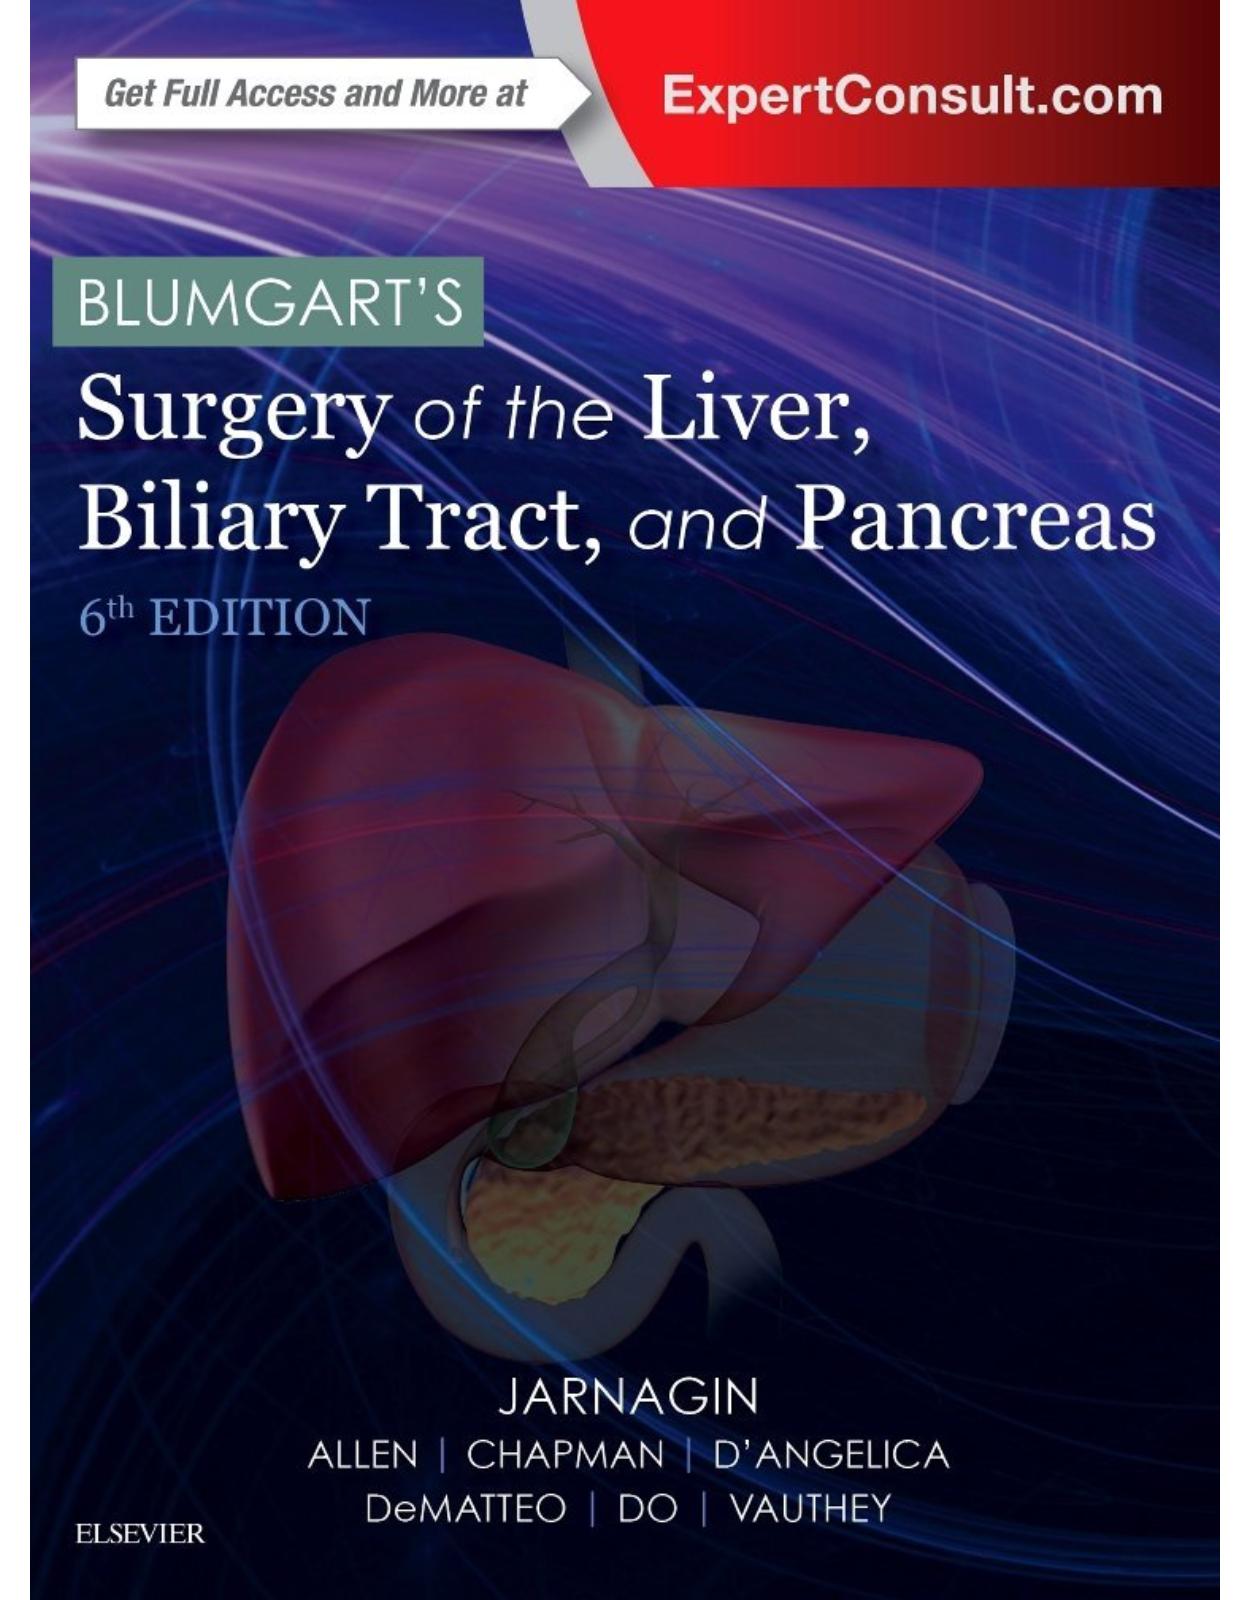 Blumgart’s Surgery of the Liver, Biliary Tract and Pancreas, 2-Volume Set, 6th Edition